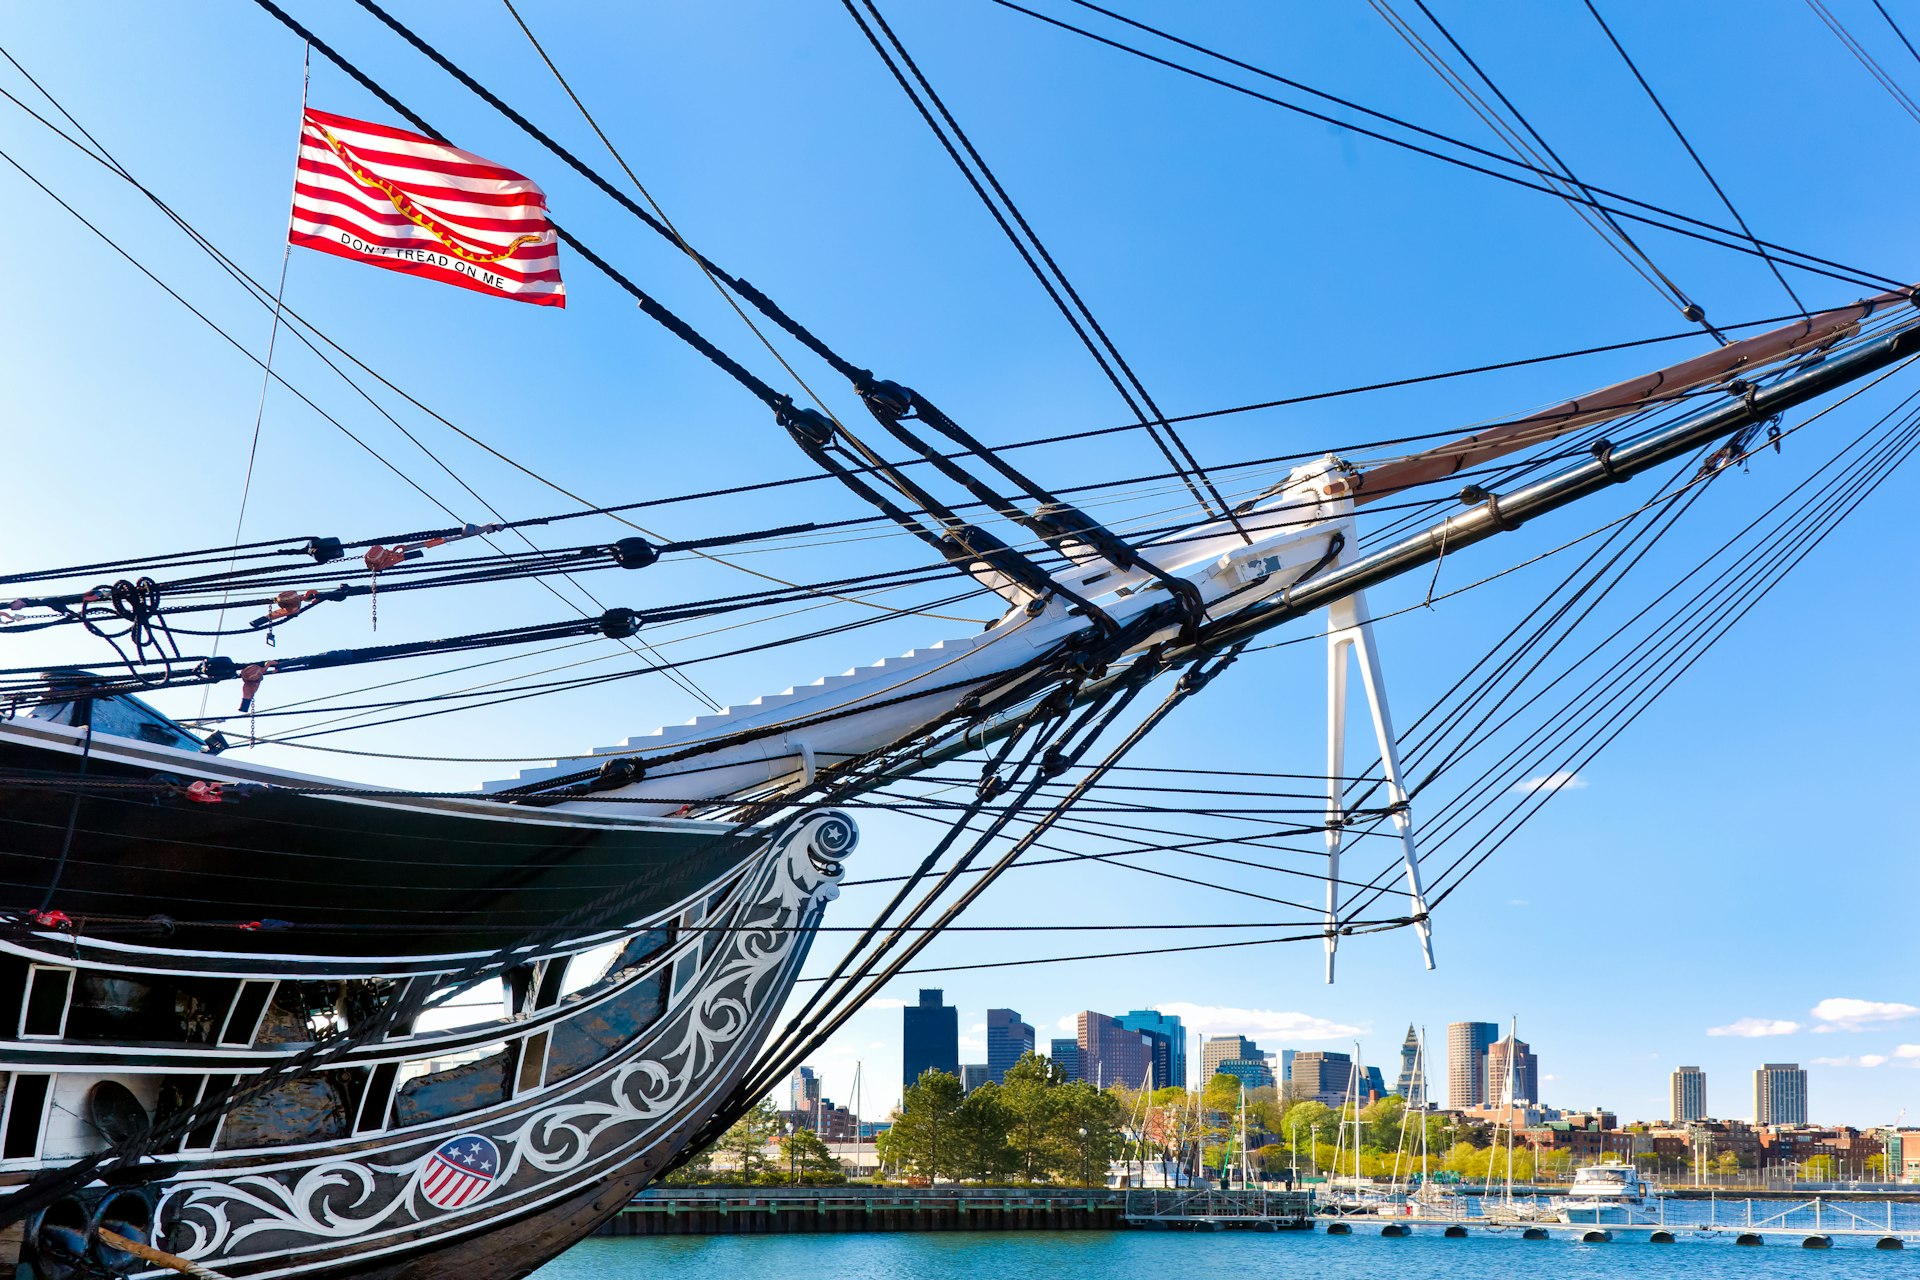 Boston skyline framed by a large ship, the USS Constitution, on a sunny day